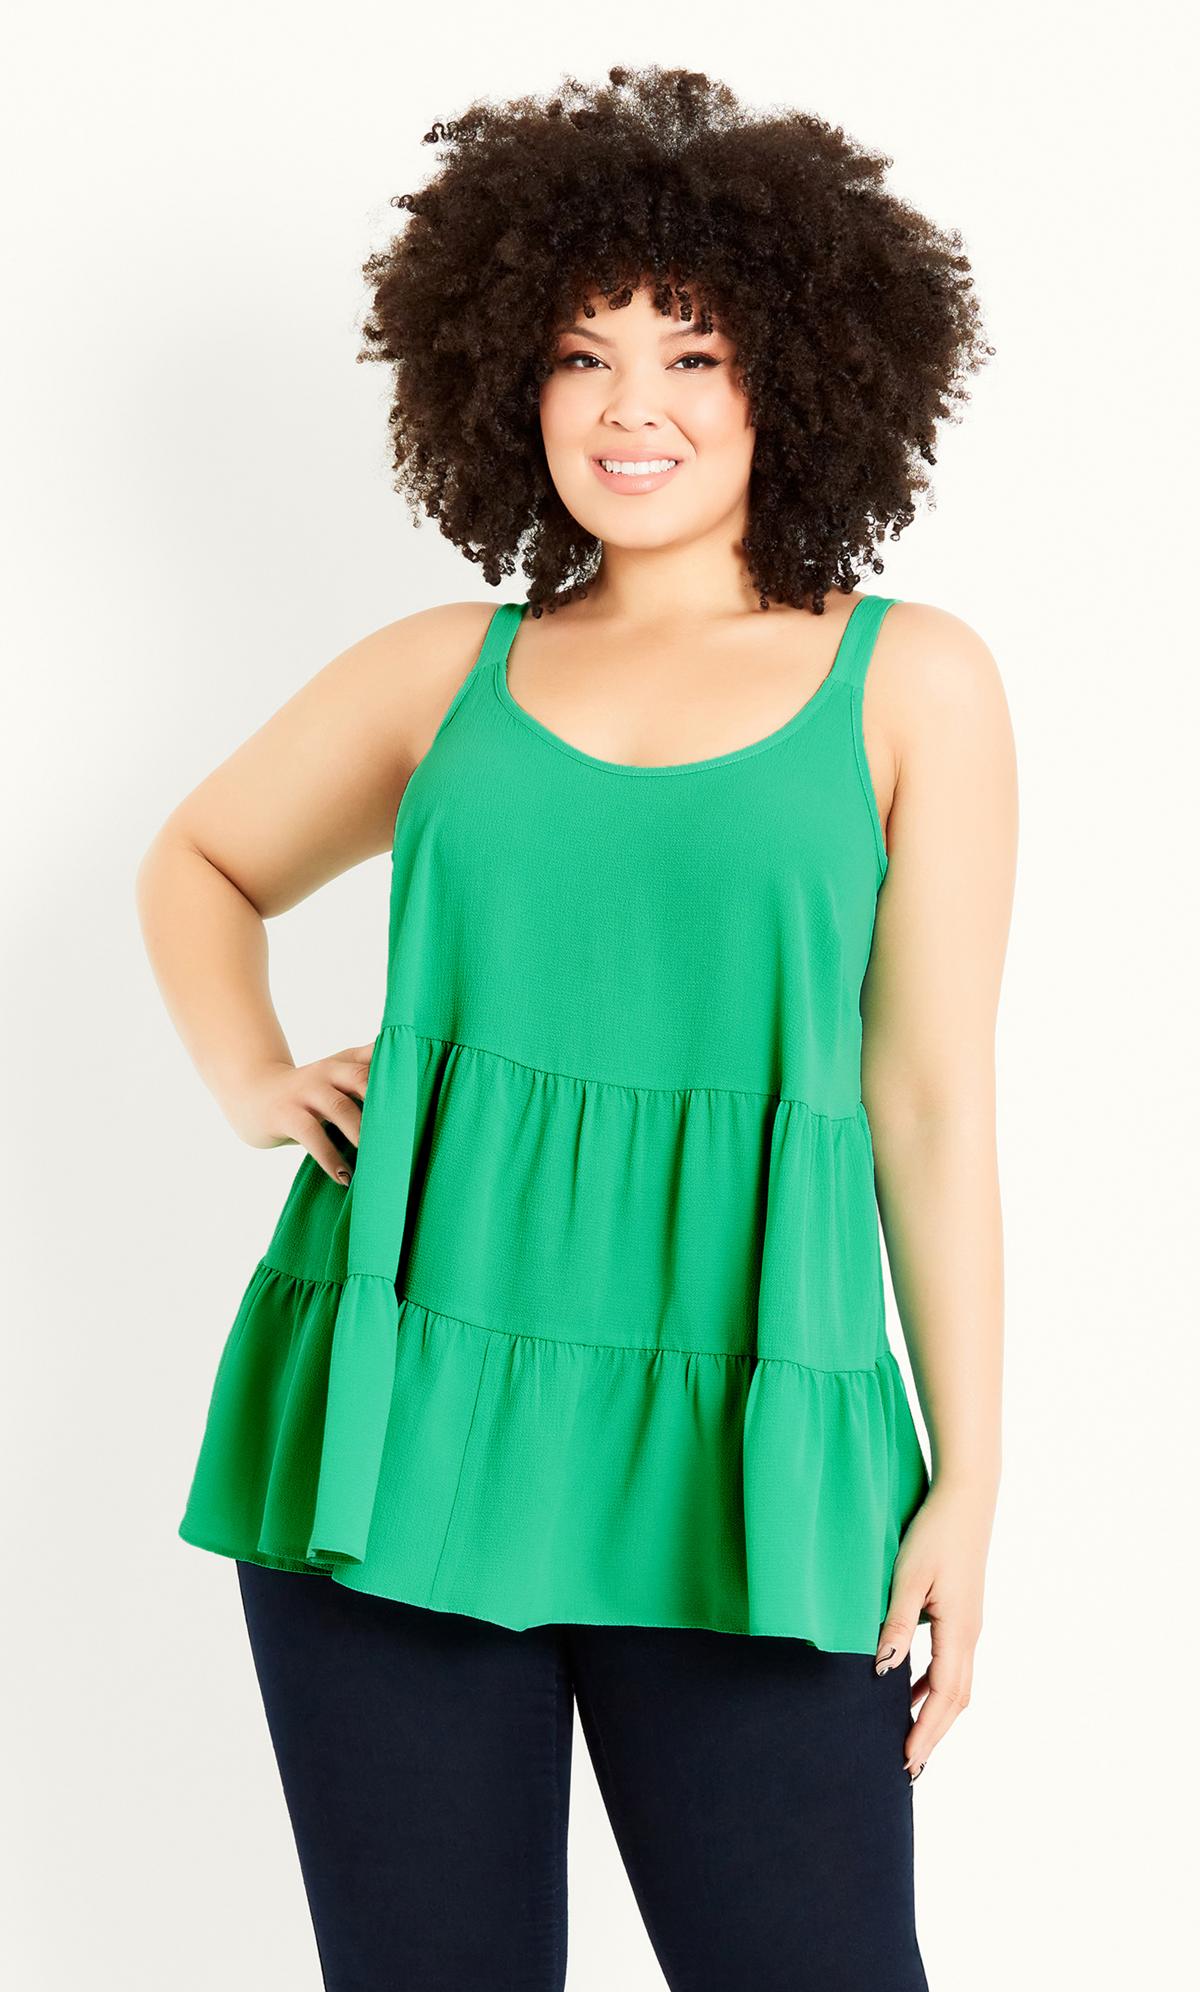 Strappy Tiered Mint Top 2